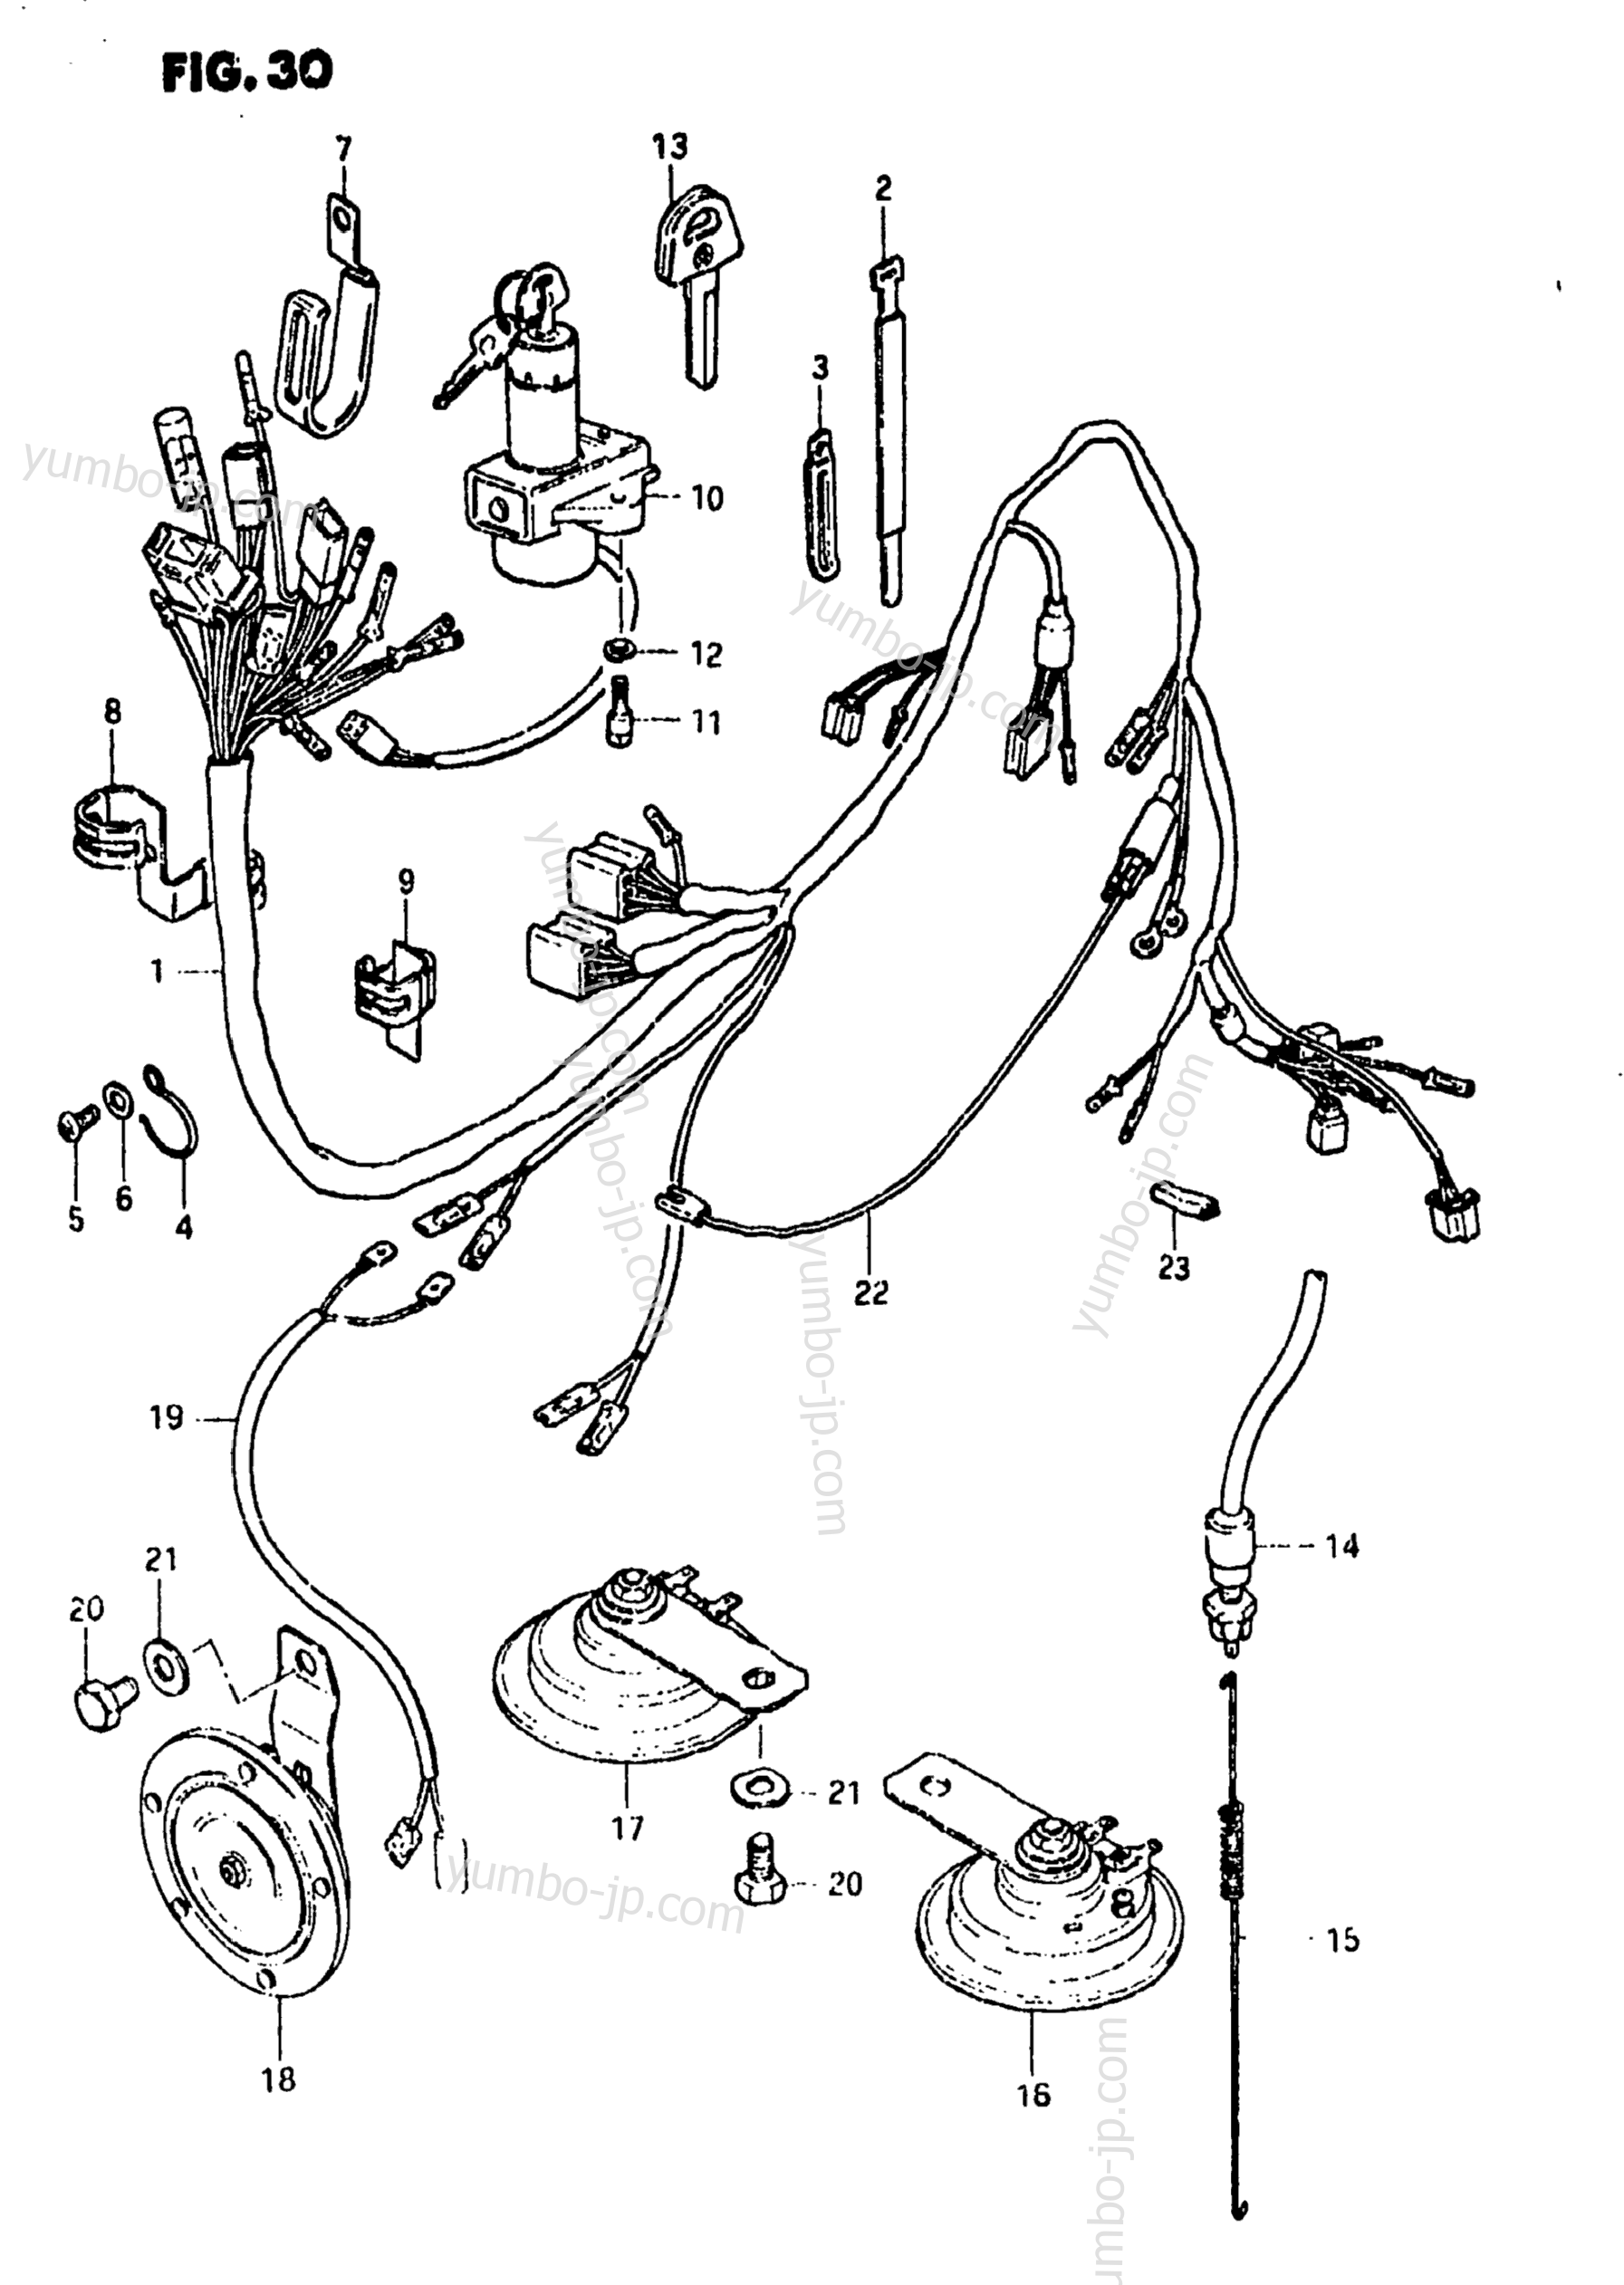 WIRING HARNESS for motorcycles SUZUKI GS850GL 1981 year